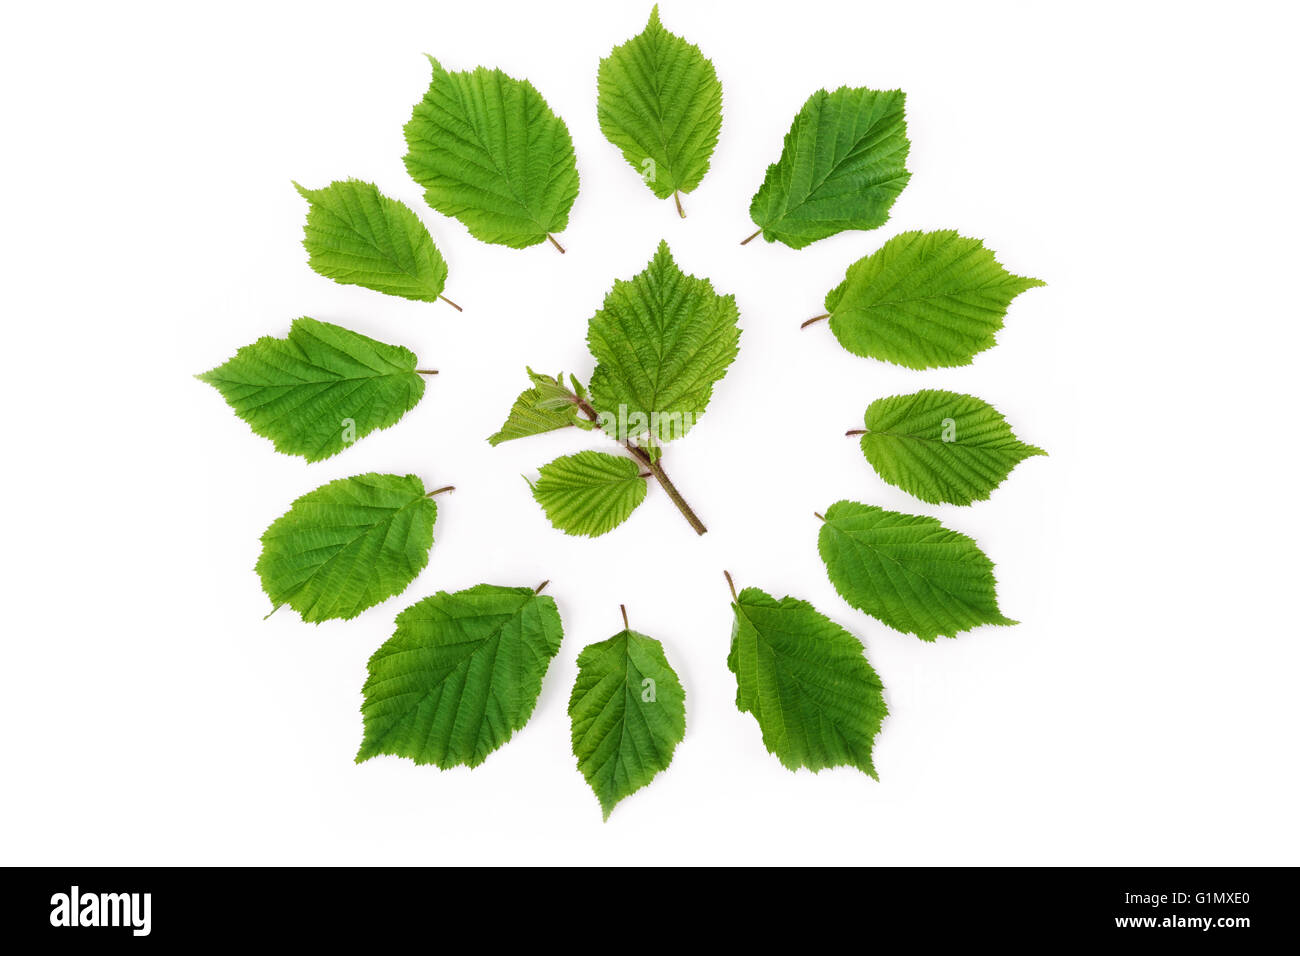 Green leaves bright pattern in round shape on white. Flat lay, top view. Stock Photo